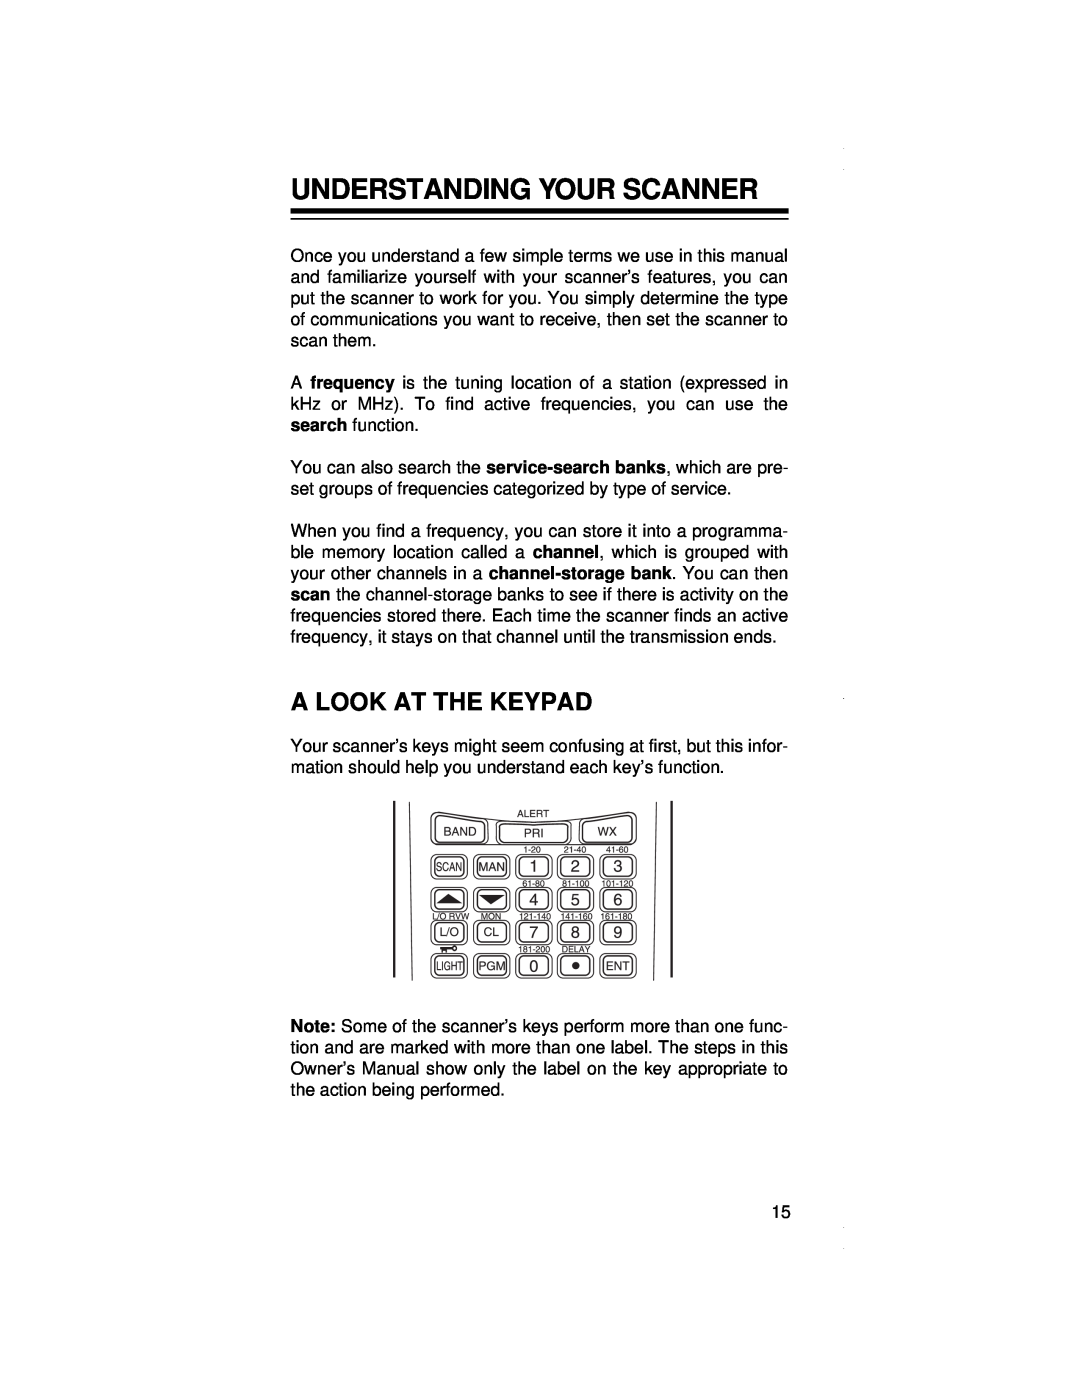 Radio Shack PRO-79 owner manual Understanding Your Scanner, A Look At The Keypad 